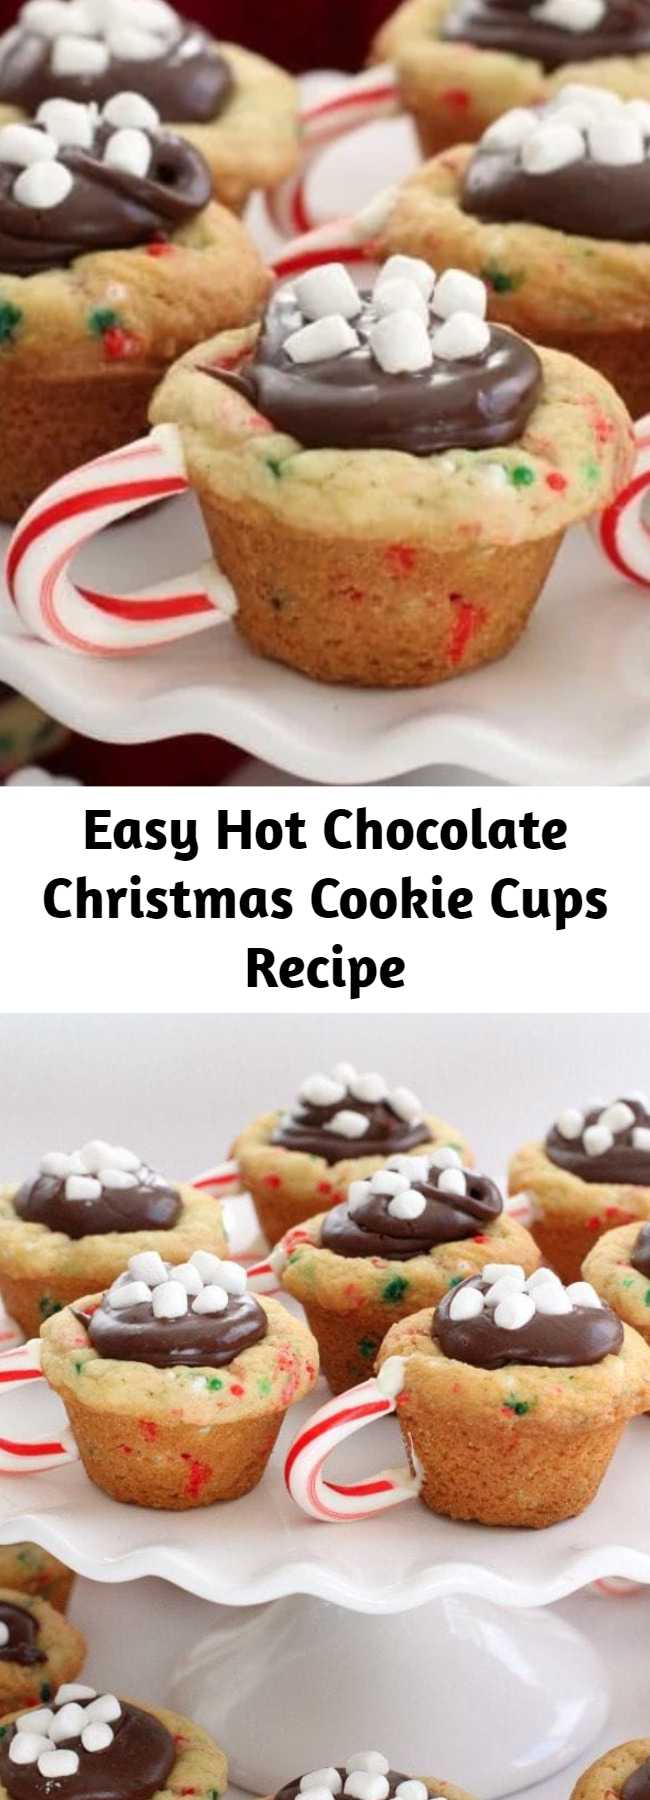 Easy Hot Chocolate Christmas Cookie Cups Recipe - Hot Chocolate Cookie Cups are the most fun & festive Christmas cookies ever! Sugar cookie cups filled with fudge, mini marshmallows & sprinkles with a darling candy cane handle!